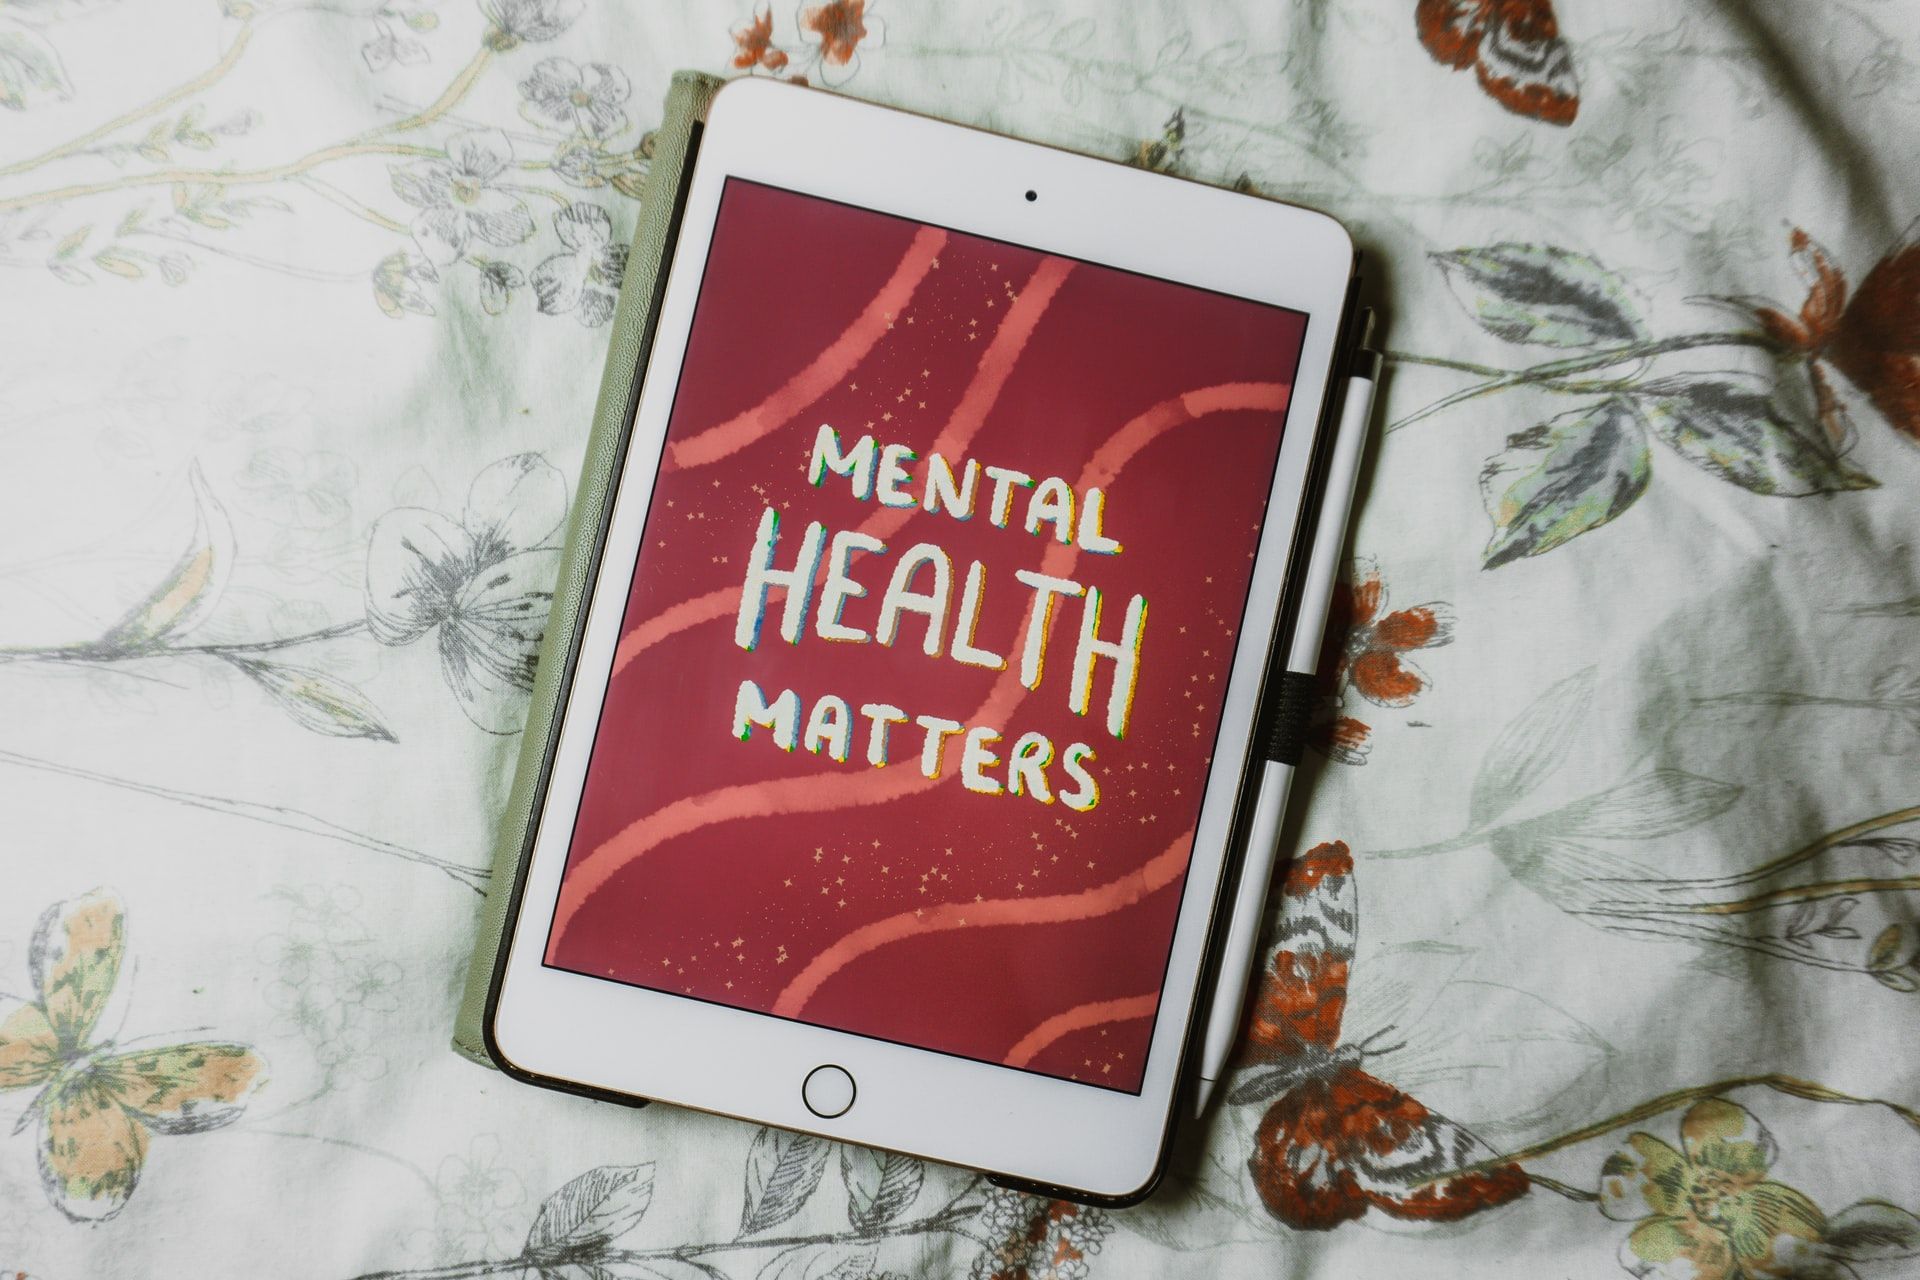 The words 'mental health matters' on an iPad screen